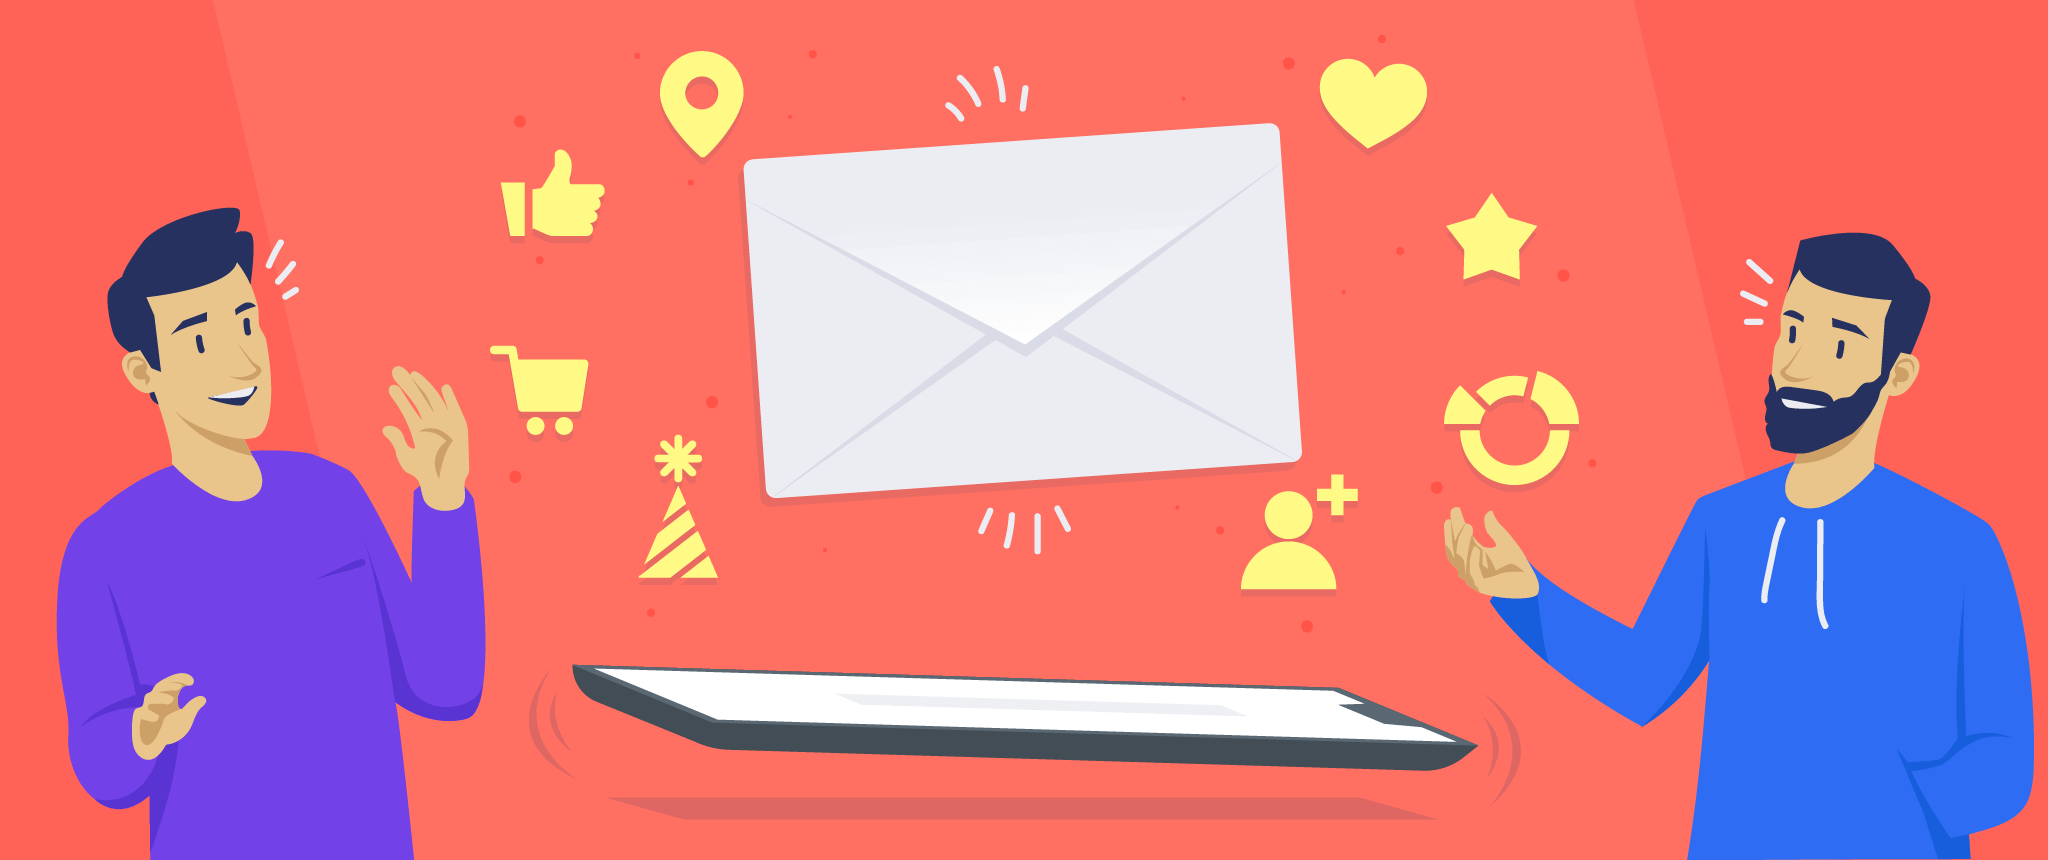 Can Email Marketing Give Subscribers the Warm and Fuzzies?